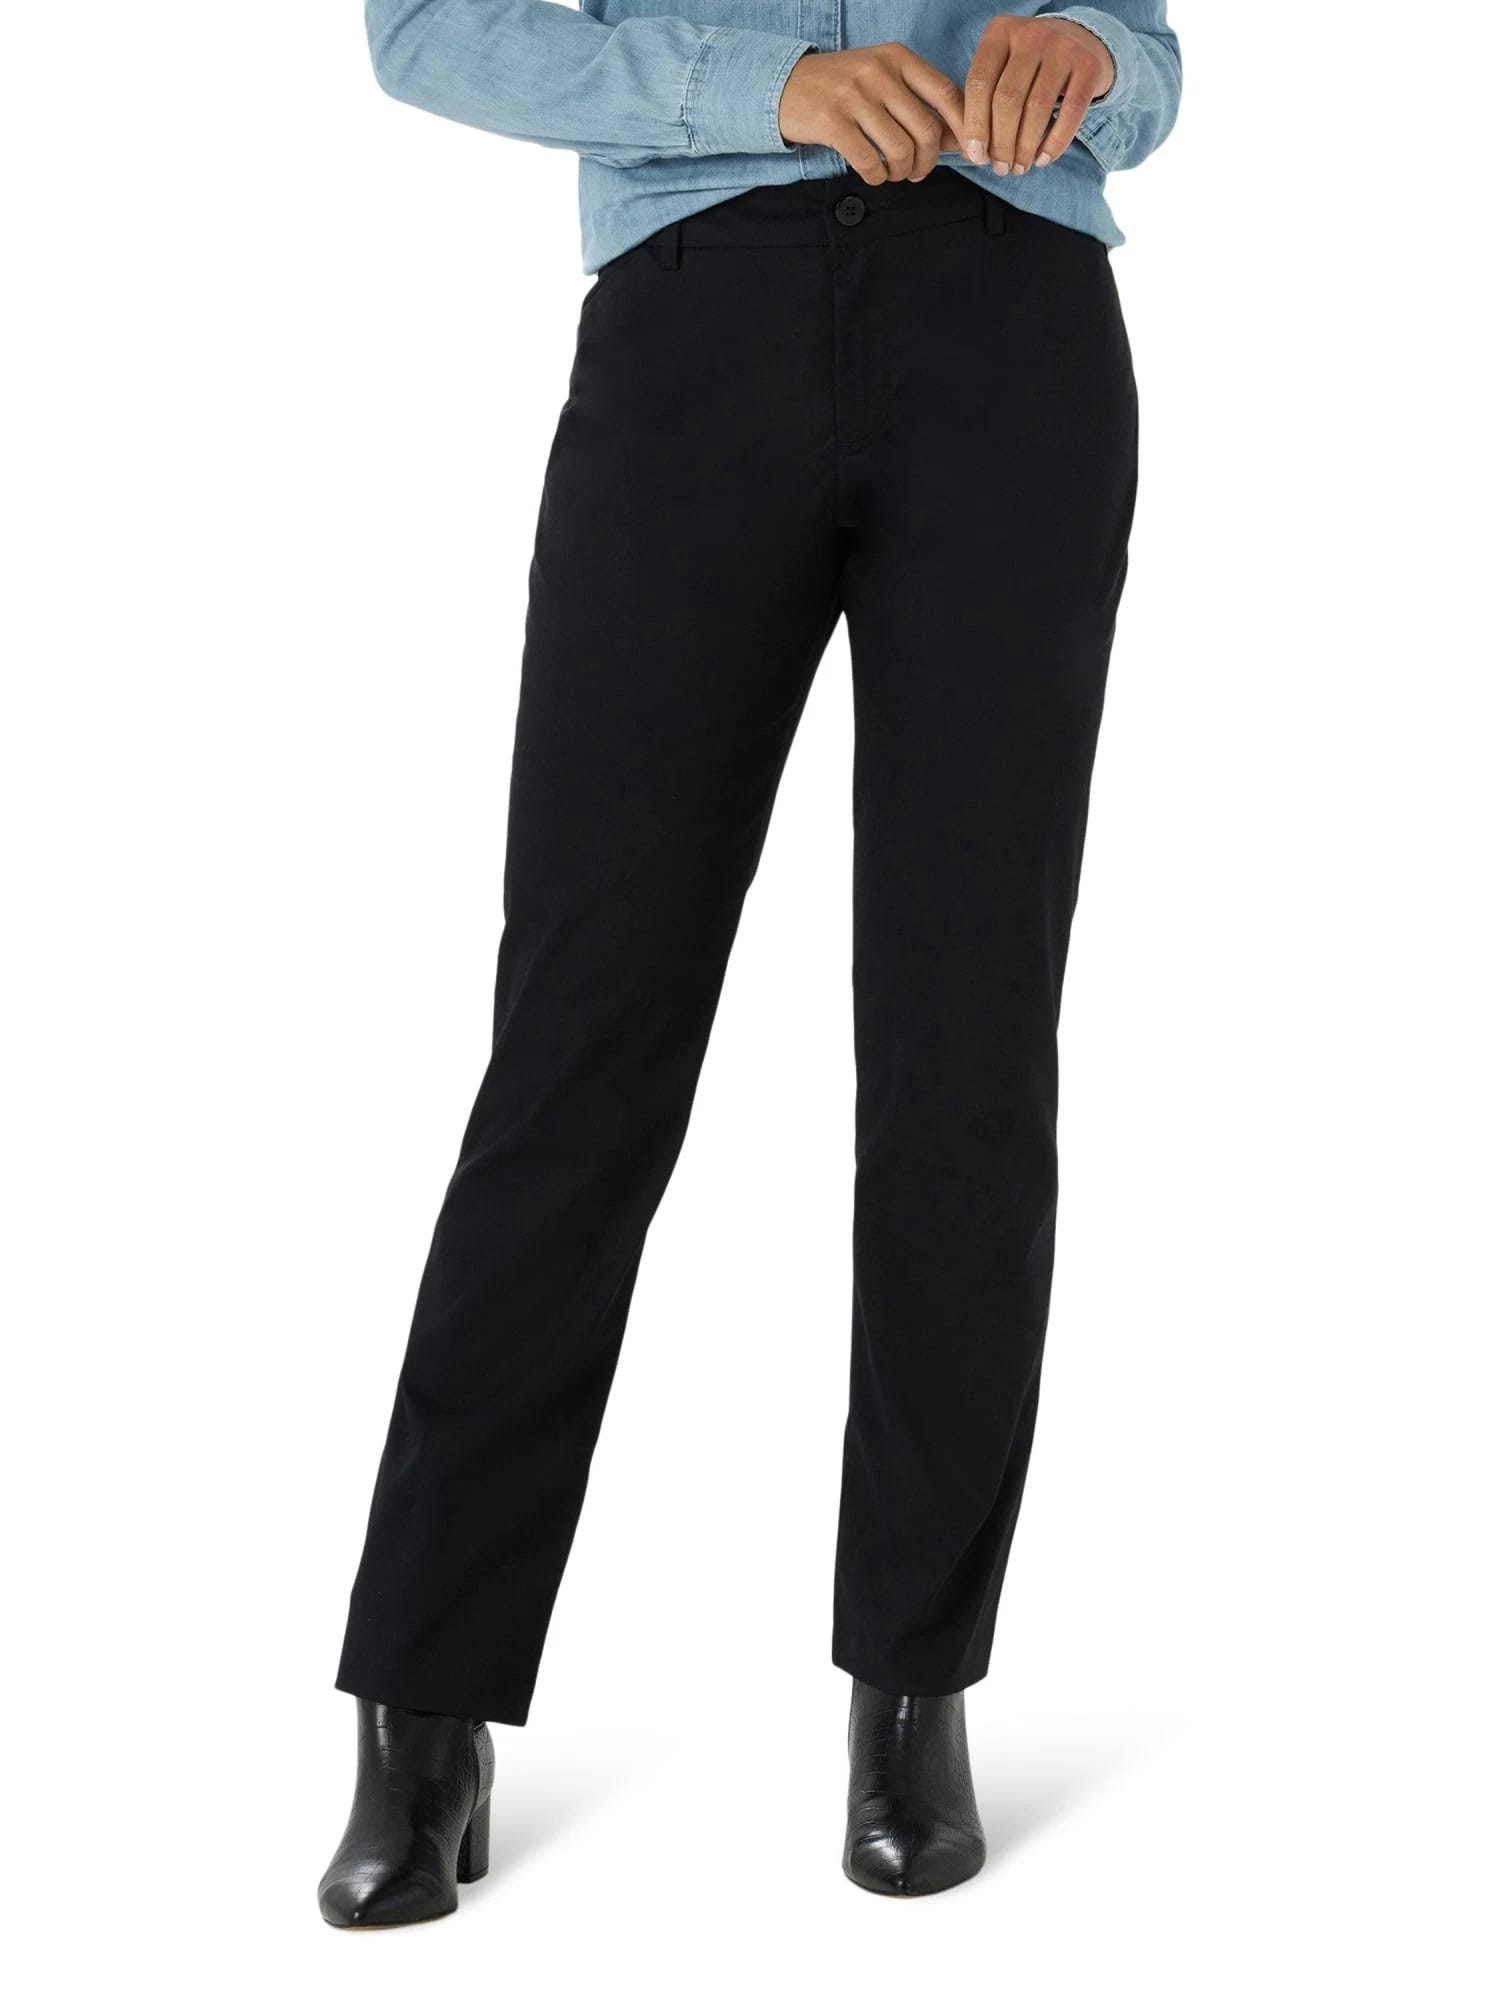 Women's Relaxed Fit Black Wrinkle-Free Straight Leg Pants, Size 10 Short | Image